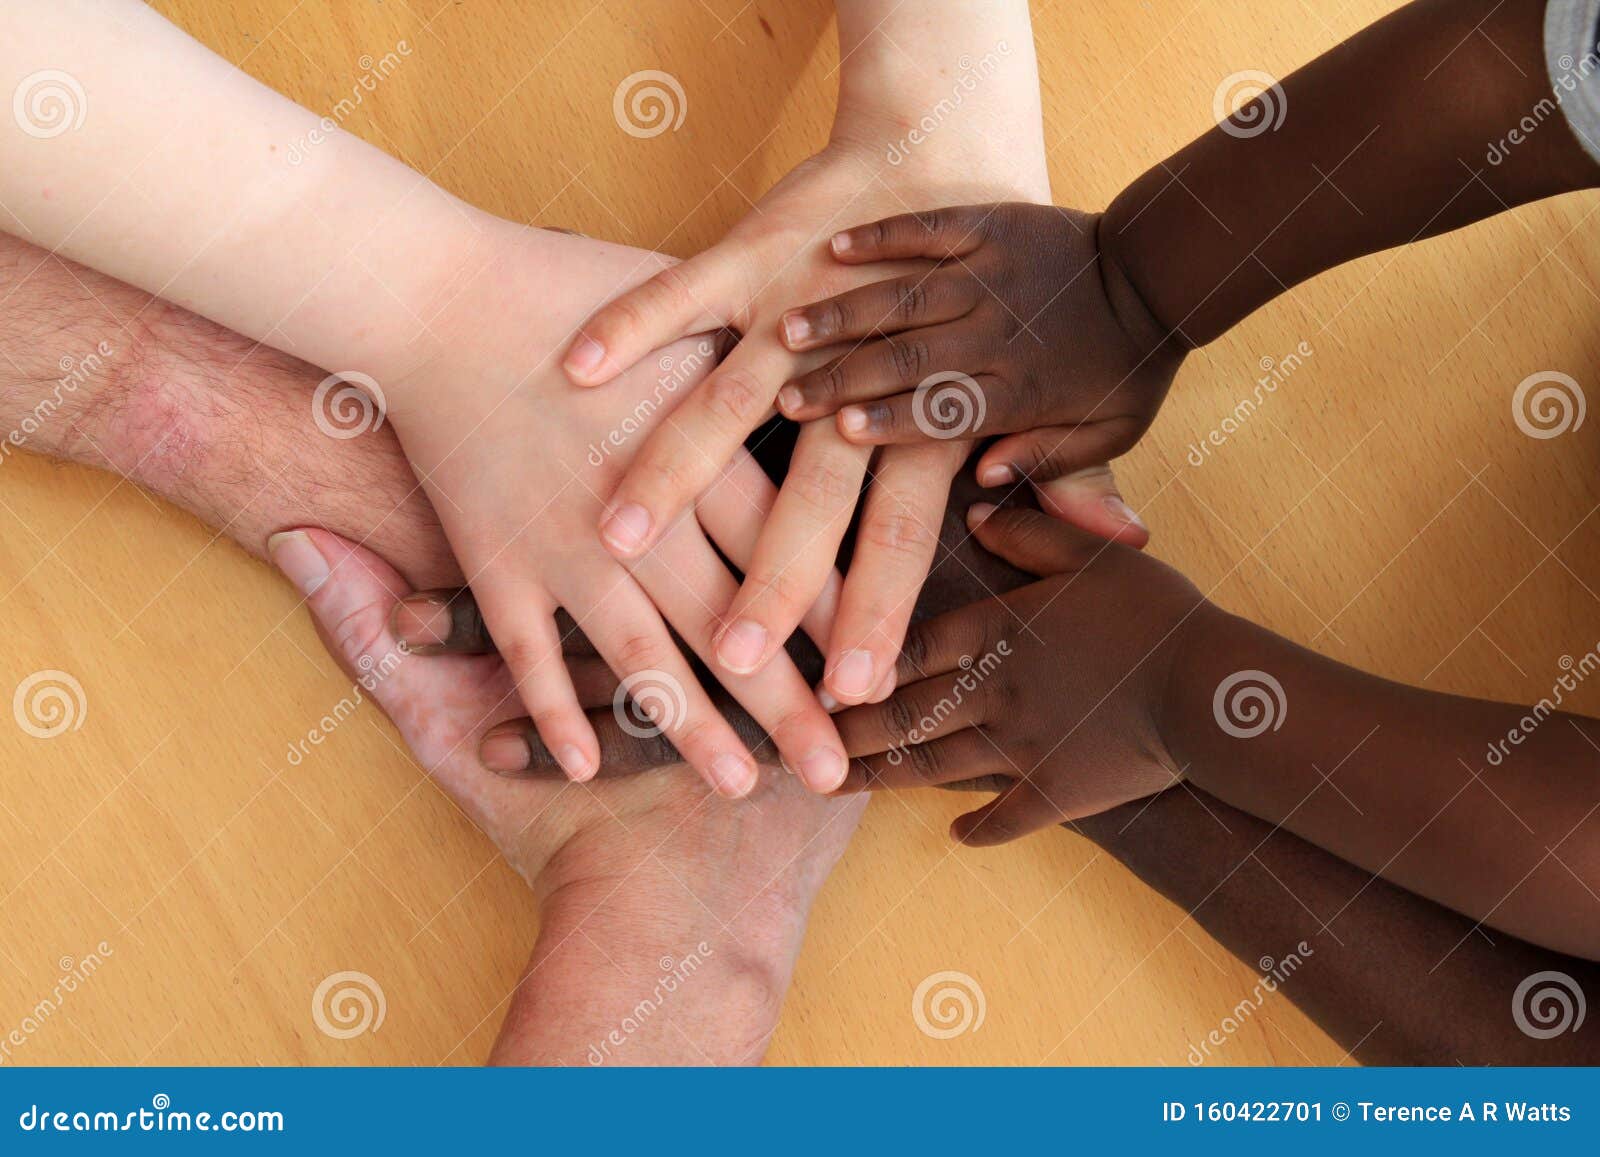 hands layering and depicting racial harmony.